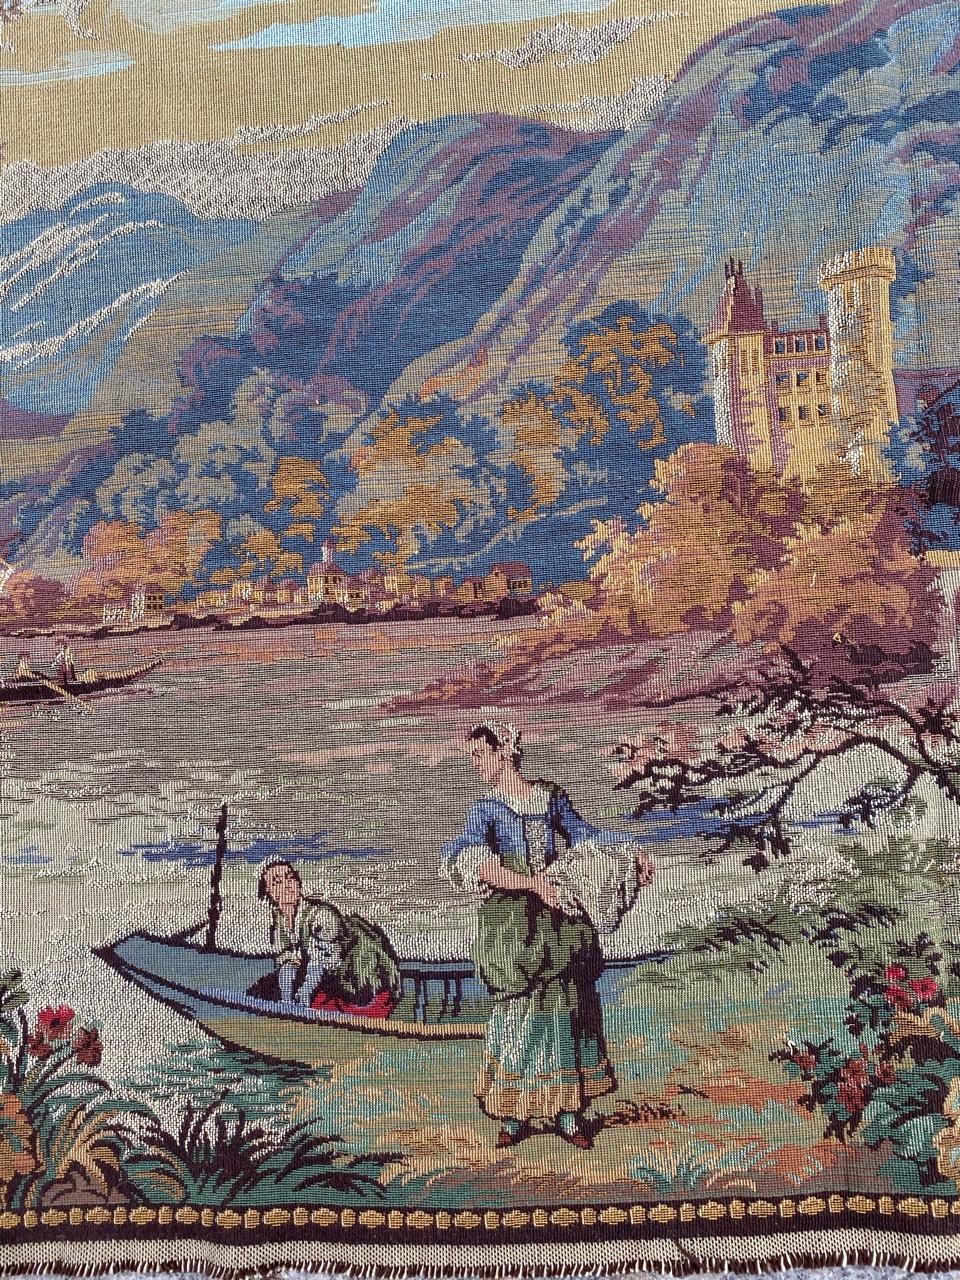 Nice French tapestry with beautiful rural design and beautiful colors, in the style of Aubusson tapestries, entirely woven with mechanical Jaquar manufacturing with wool and cotton.